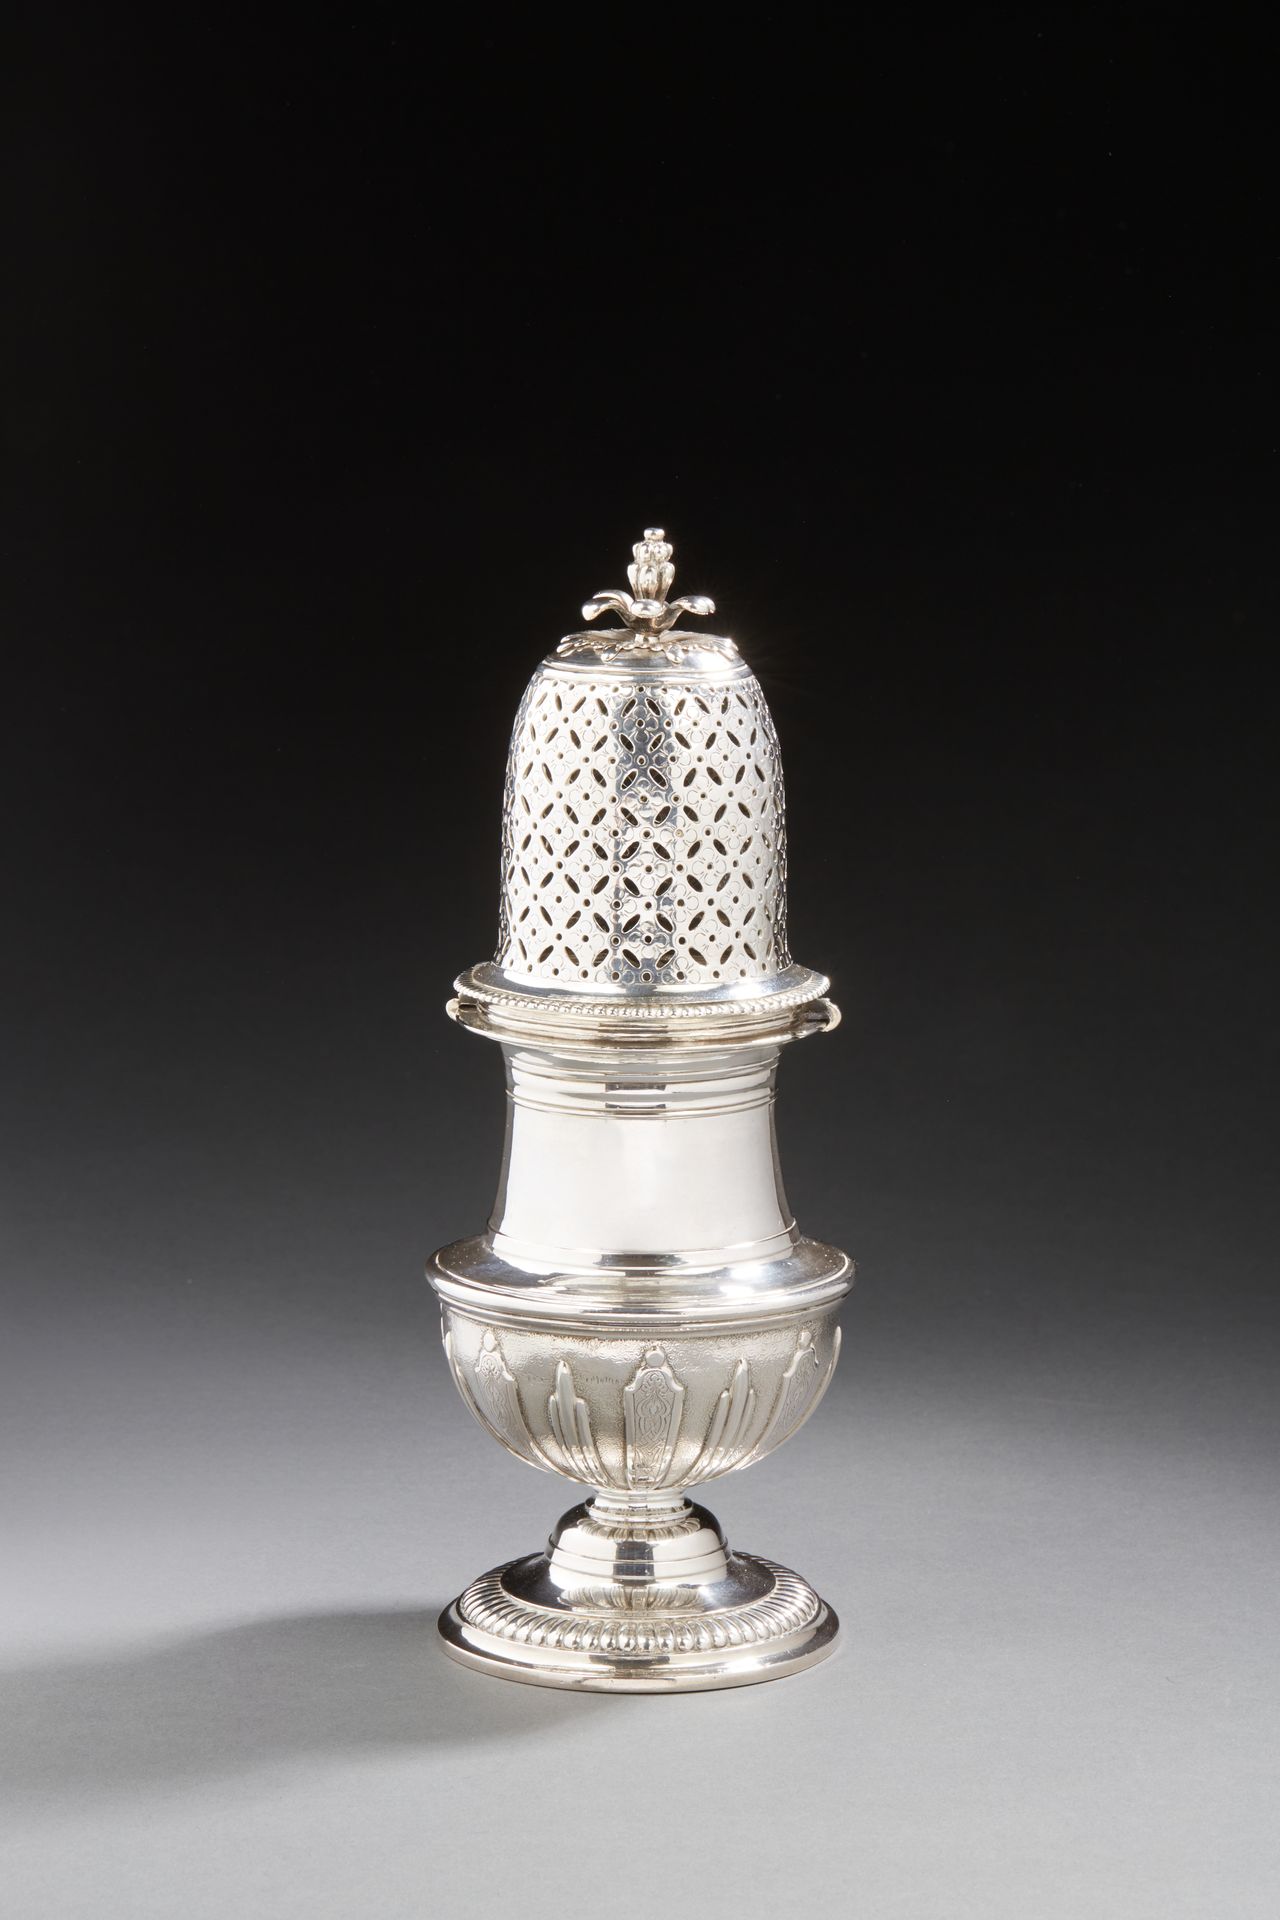 Null CHAMBERY 1725 - 1751
A silver saupoudreuse of baluster form, it rests on a &hellip;